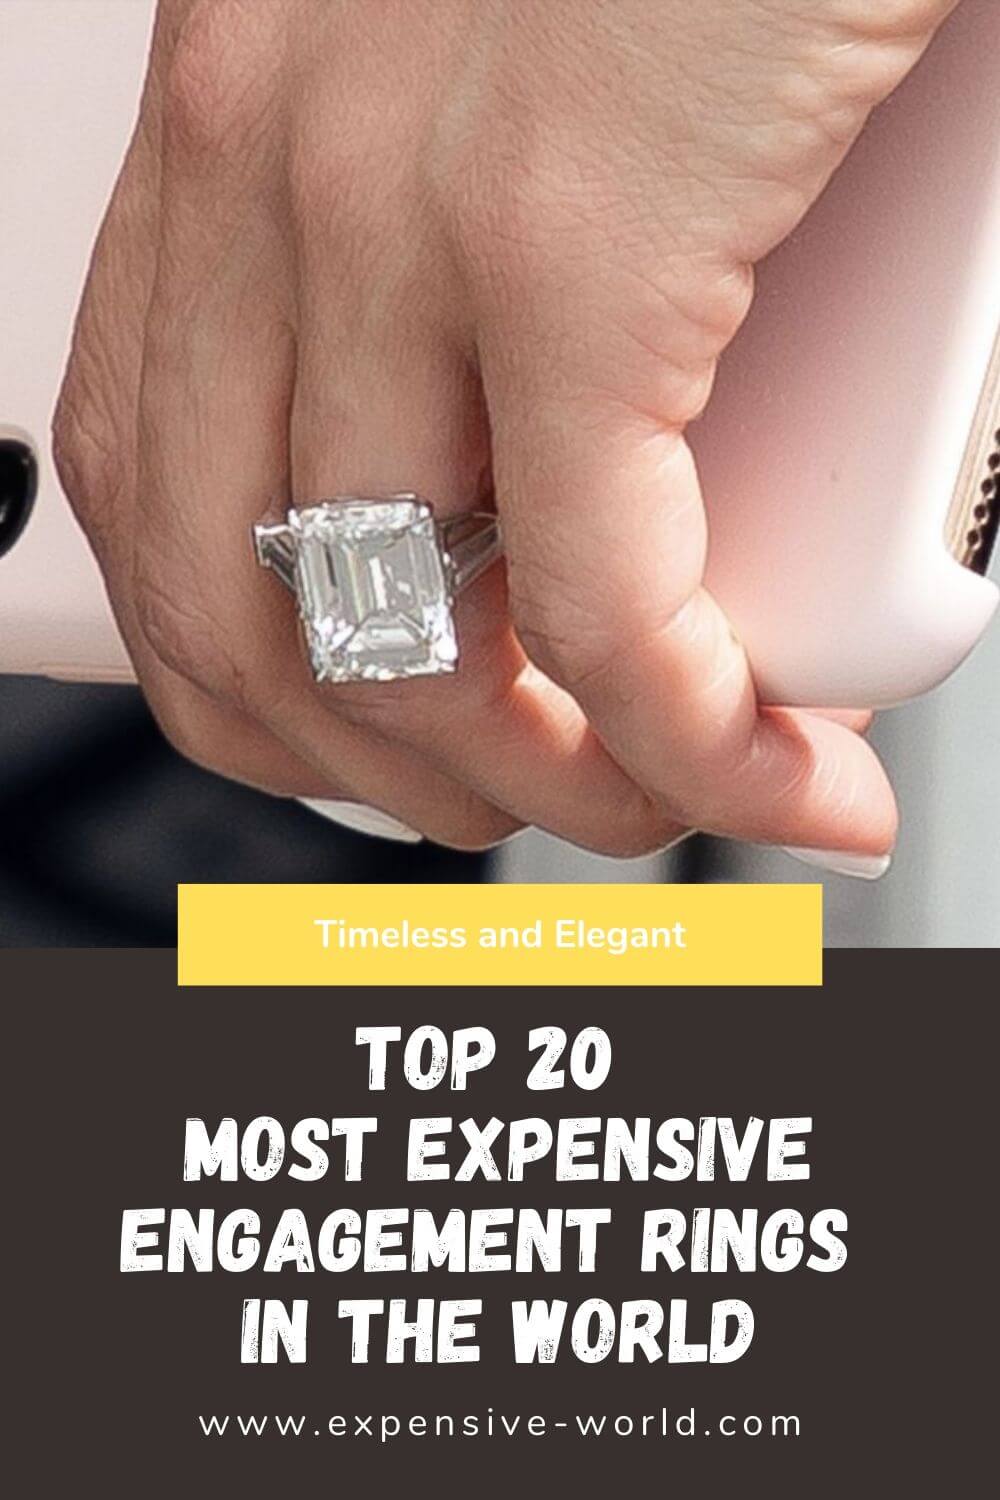 Top 20 Most Expensive Engagement Rings in the World